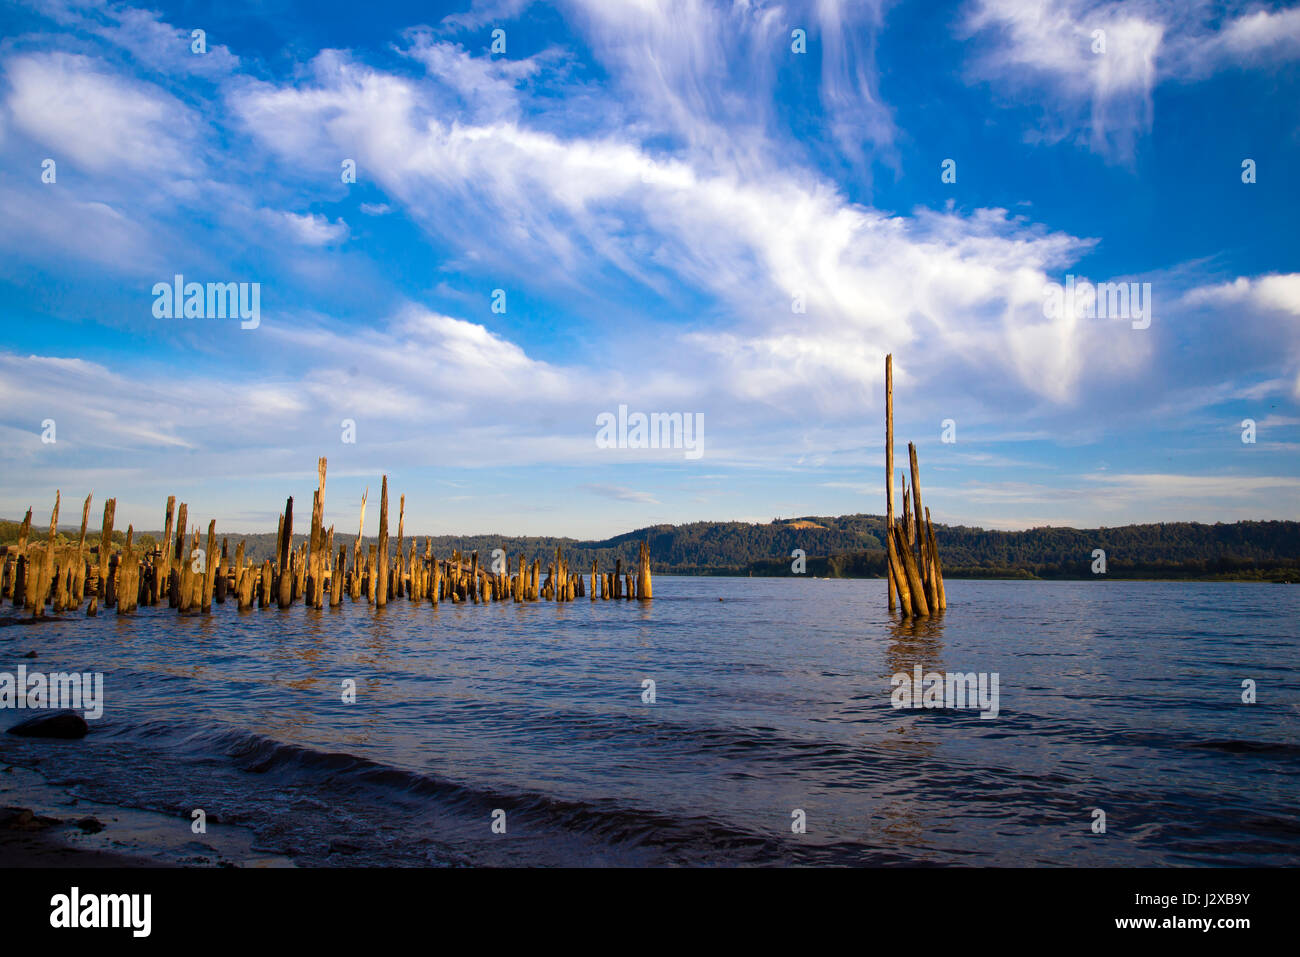 Rotten wooden piles of the old pier sticking out of the water on the Columbia River as a symbol of all the past bygone time. Landscape symbolic view Stock Photo